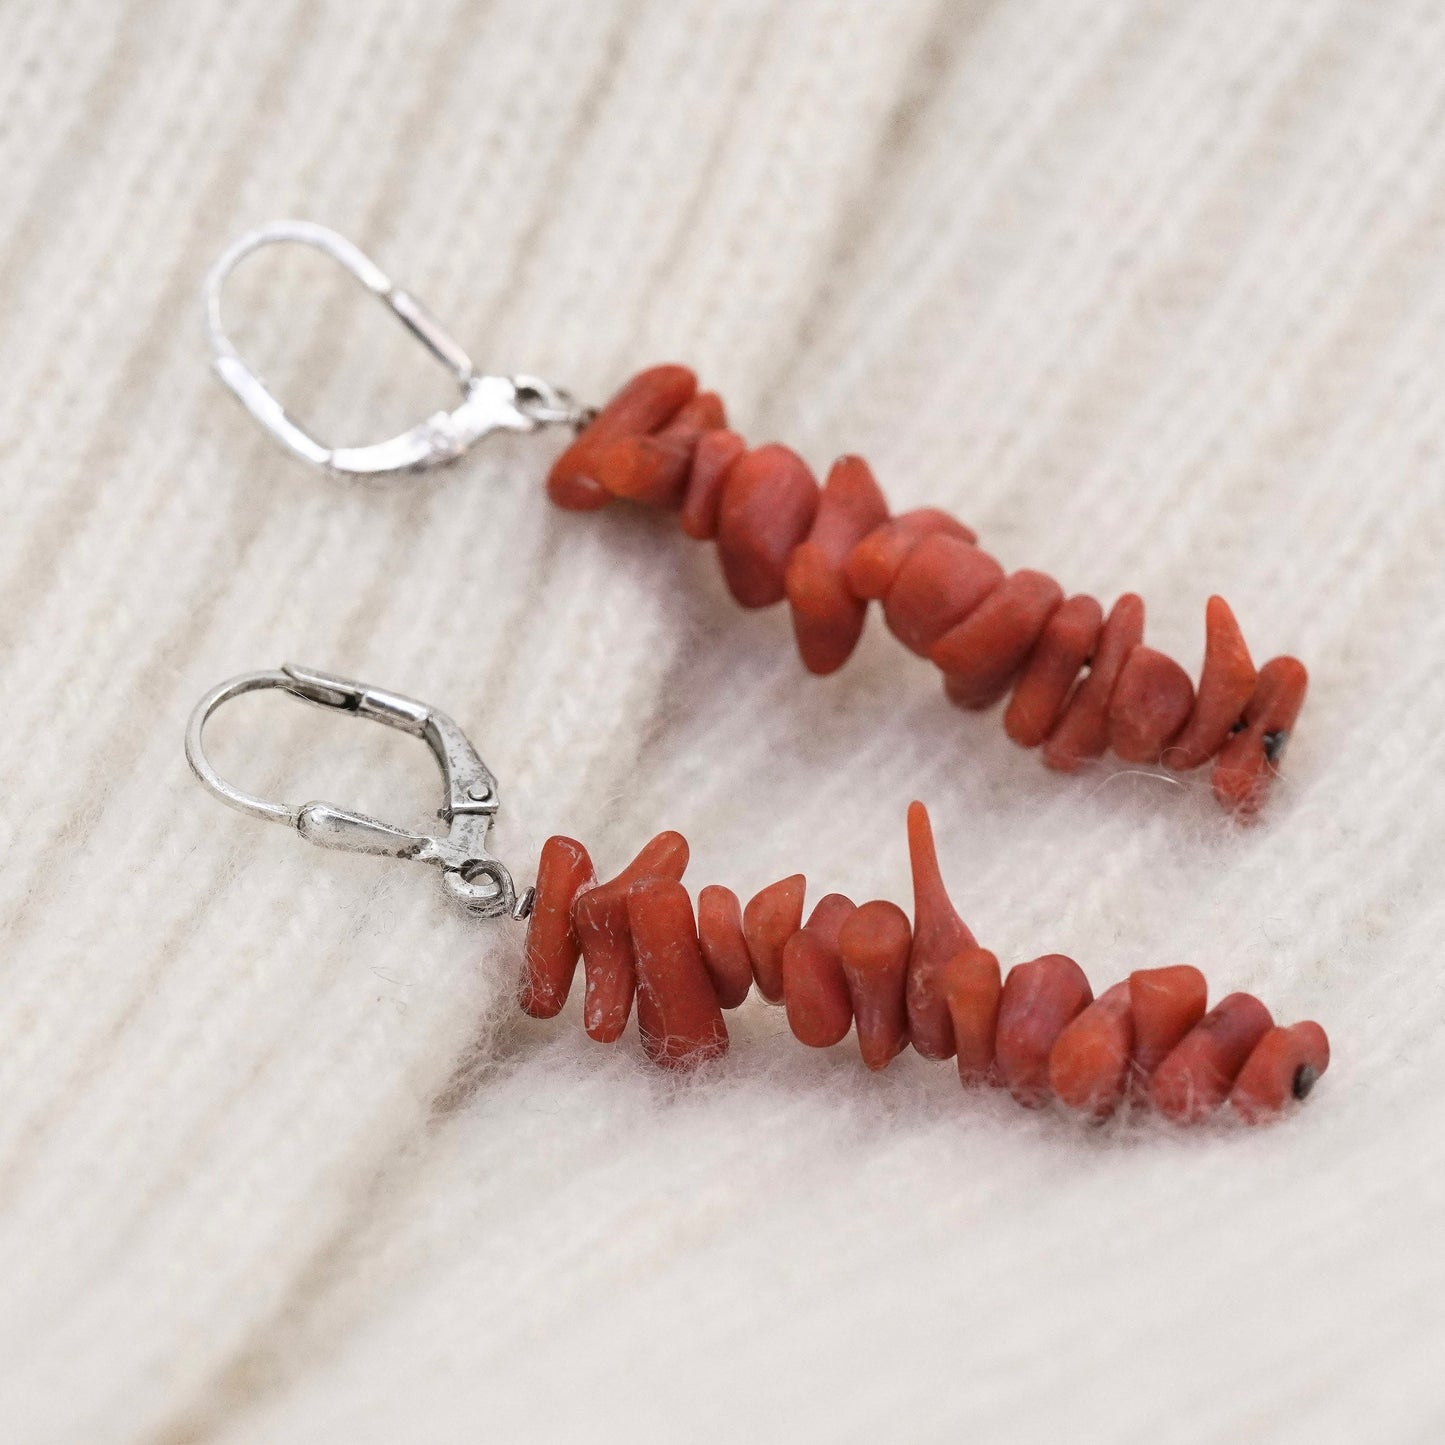 Vintage Sterling 925 silver handmade earrings with cluster coral beads